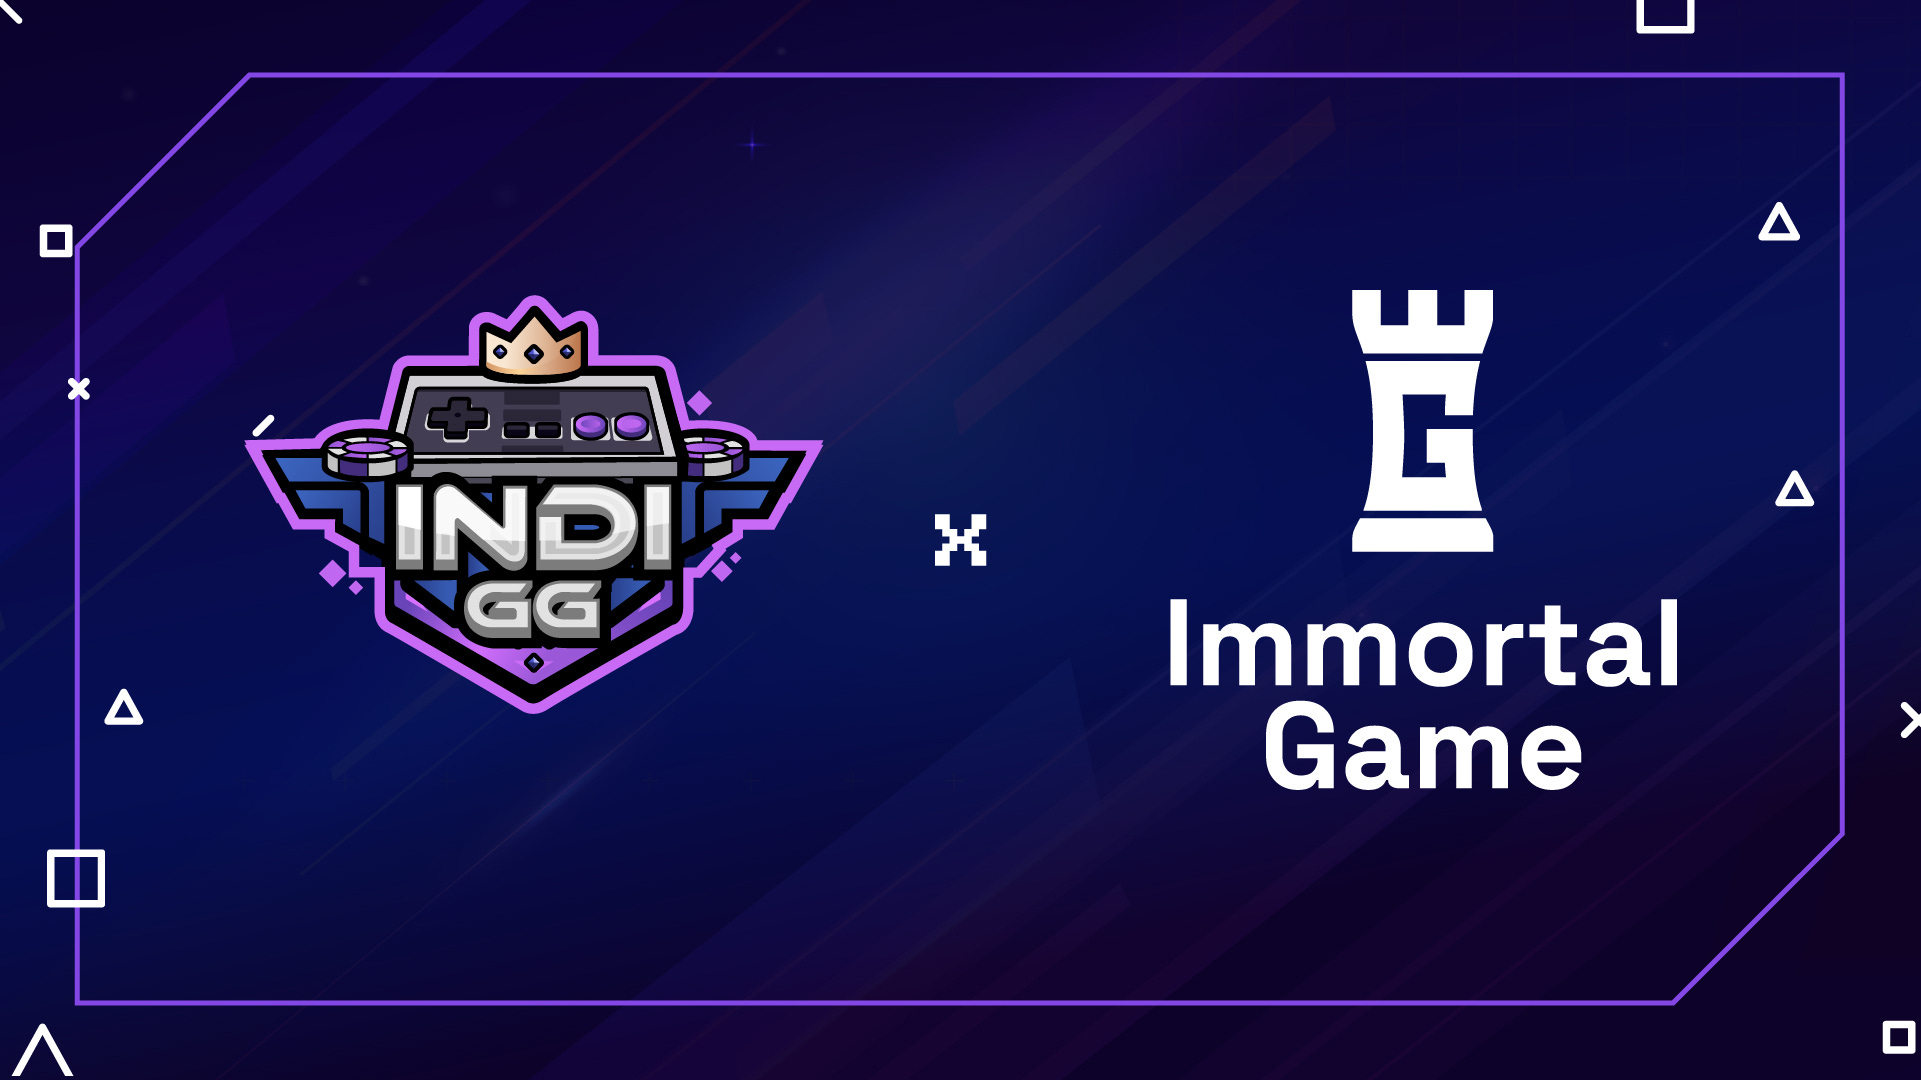 IndiGG is partnering with Immortal Game for an epic Web3 chess season